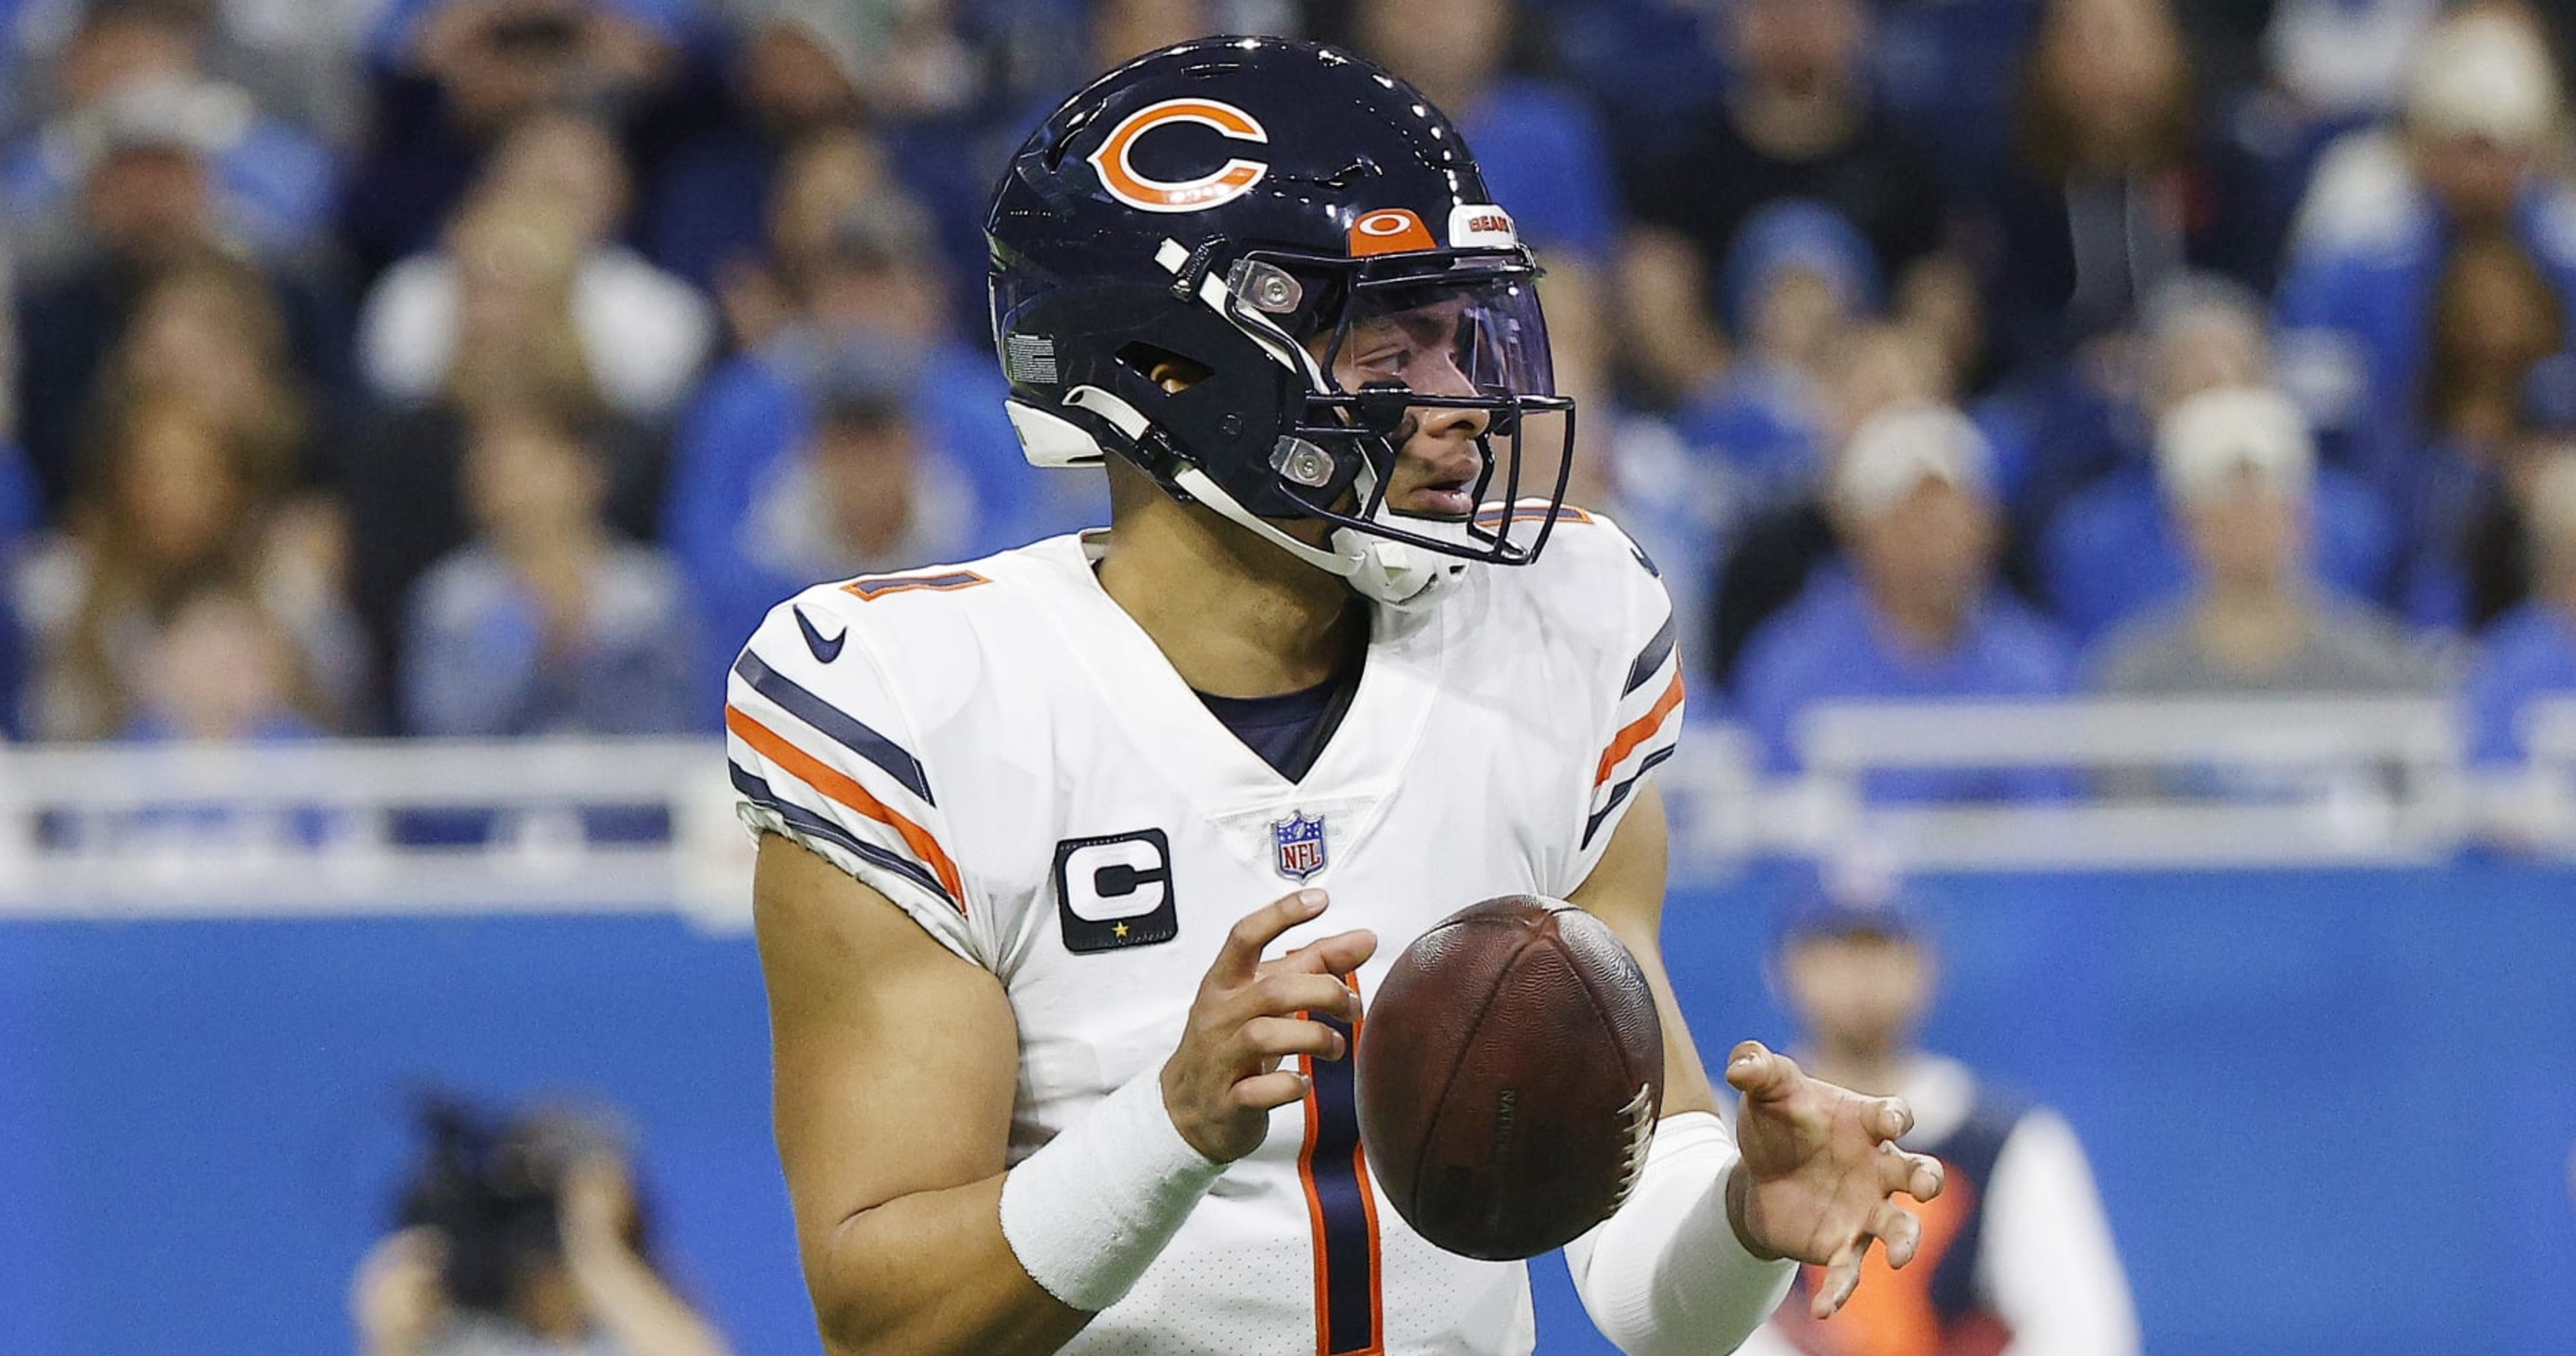 2023 NFL Draft Rumors Bears 'Long Down the Road' on Trade for No. 1